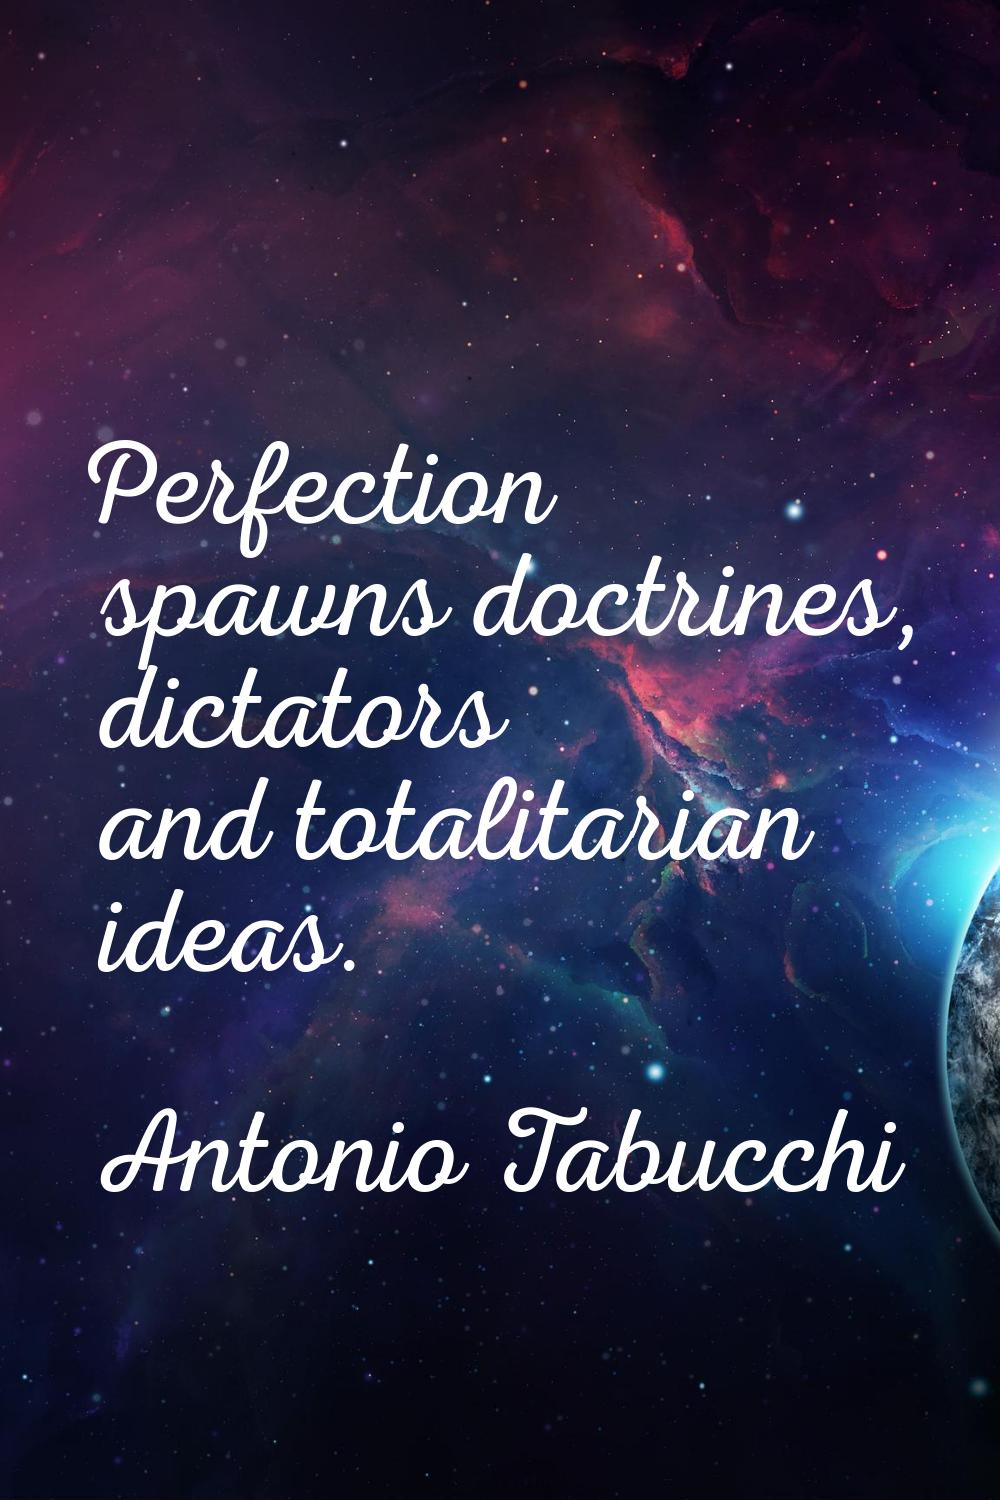 Perfection spawns doctrines, dictators and totalitarian ideas.